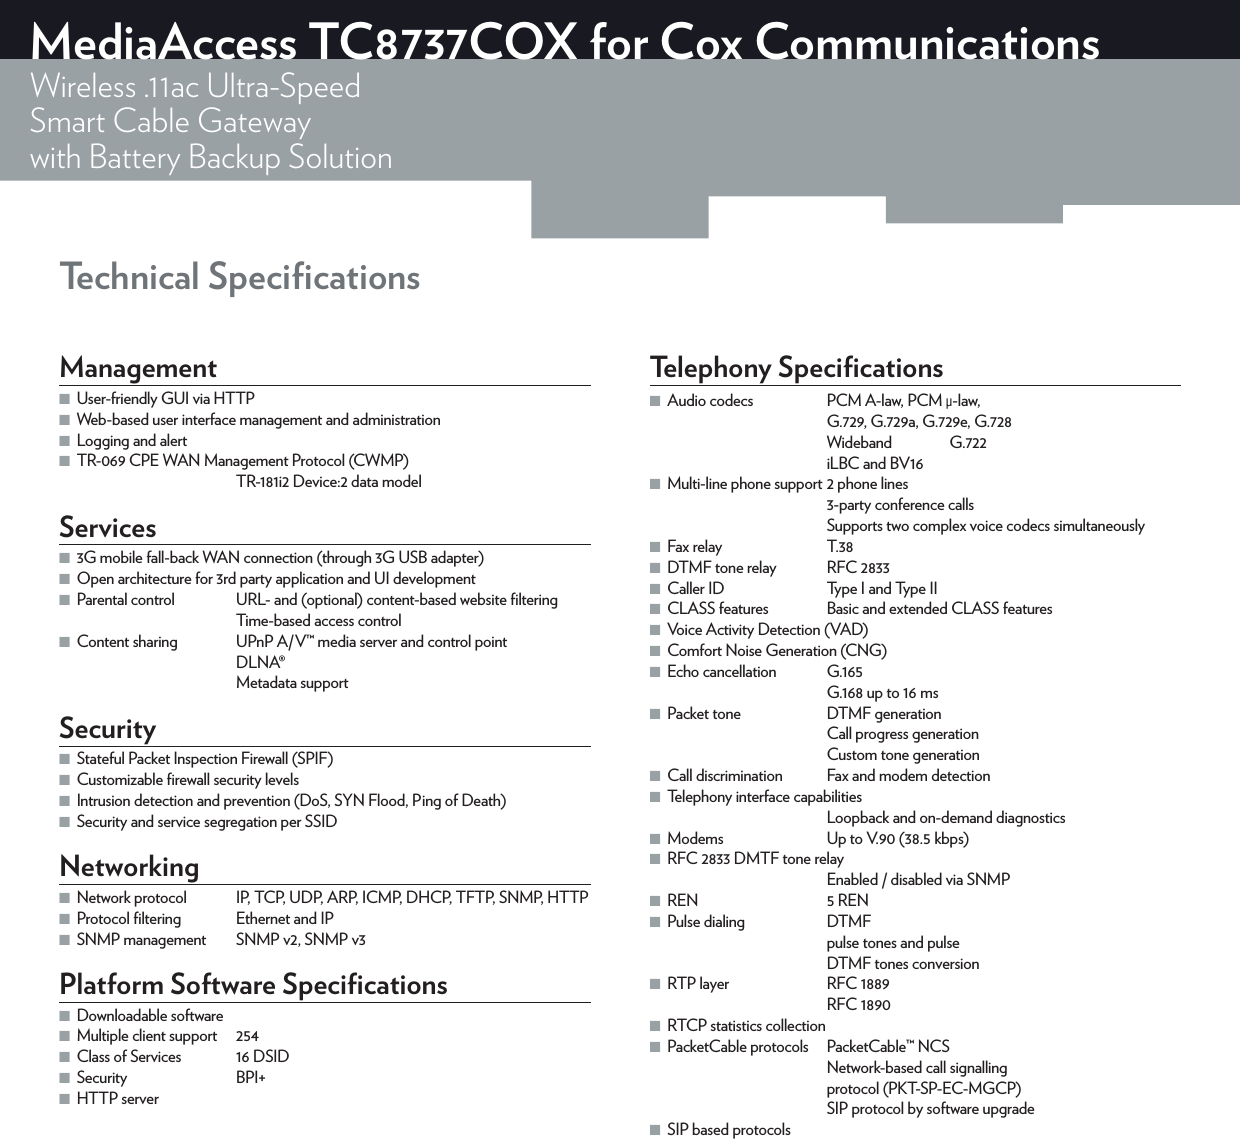 Technical SpeciﬁcationsMediaAccess TC8737COX for Cox CommunicationsWireless .11ac Ultra-SpeedSmart Cable Gatewaywith Battery Backup SolutionManagement ■User-friendly GUI via HTTP ■Web-based user interface management and administration ■Logging and alert ■TR-069 CPE WAN Management Protocol (CWMP)TR-181i2 Device:2 data modelServices ■3G mobile fall-back WAN connection (through 3G USB adapter) ■Open architecture for 3rd party application and UI development ■Parental control  URL- and (optional) content-based website ﬁlteringTime-based access control ■Content sharing  UPnP A/V™ media server and control pointDLNA®Metadata supportSecurity ■Stateful Packet Inspection Firewall (SPIF) ■Customizable ﬁrewall security levels ■Intrusion detection and prevention (DoS, SYN Flood, Ping of Death) ■Security and service segregation per SSIDNetworking ■Network protocol  IP, TCP, UDP, ARP, ICMP, DHCP, TFTP, SNMP, HTTP ■Protocol ﬁltering  Ethernet and IP ■SNMP management  SNMPv2, SNMPv3Platform Software Speciﬁcations ■Downloadable software ■Multiple client support  254 ■Class of Services  16 DSID ■Security BPI+ ■HTTP serverTelephony Speciﬁcations ■Audio codecs  PCM A-law, PCM μ-law, G.729, G.729a, G.729e, G.728Wideband G.722iLBC and BV16 ■Multi-line phone support 2 phone lines3-party conference callsSupports two complex voice codecs simultaneously ■Fax relay  T.38 ■DTMF tone relay  RFC2833 ■Caller ID  Type I and Type II ■CLASS features  Basic and extended CLASS features ■Voice Activity Detection (VAD) ■Comfort Noise Generation (CNG) ■Echo cancellation  G.165G.168 up to 16ms ■Packet tone  DTMF generationCall progress generationCustom tone generation ■Call discrimination  Fax and modem detection ■Telephony interface capabilitiesLoopback and on-demand diagnostics ■Modems  Up to V.90 (38.5kbps) ■RFC2833 DMTF tone relayEnabled / disabled via SNMP ■REN  5 REN ■Pulse dialing  DTMFpulse tones and pulseDTMF tones conversion ■RTP layer  RFC1889RFC1890 ■RTCP statistics collection ■PacketCable protocols  PacketCable™ NCSNetwork-based call signallingprotocol (PKT-SP-EC-MGCP)SIP protocol by software upgrade ■SIP based protocols